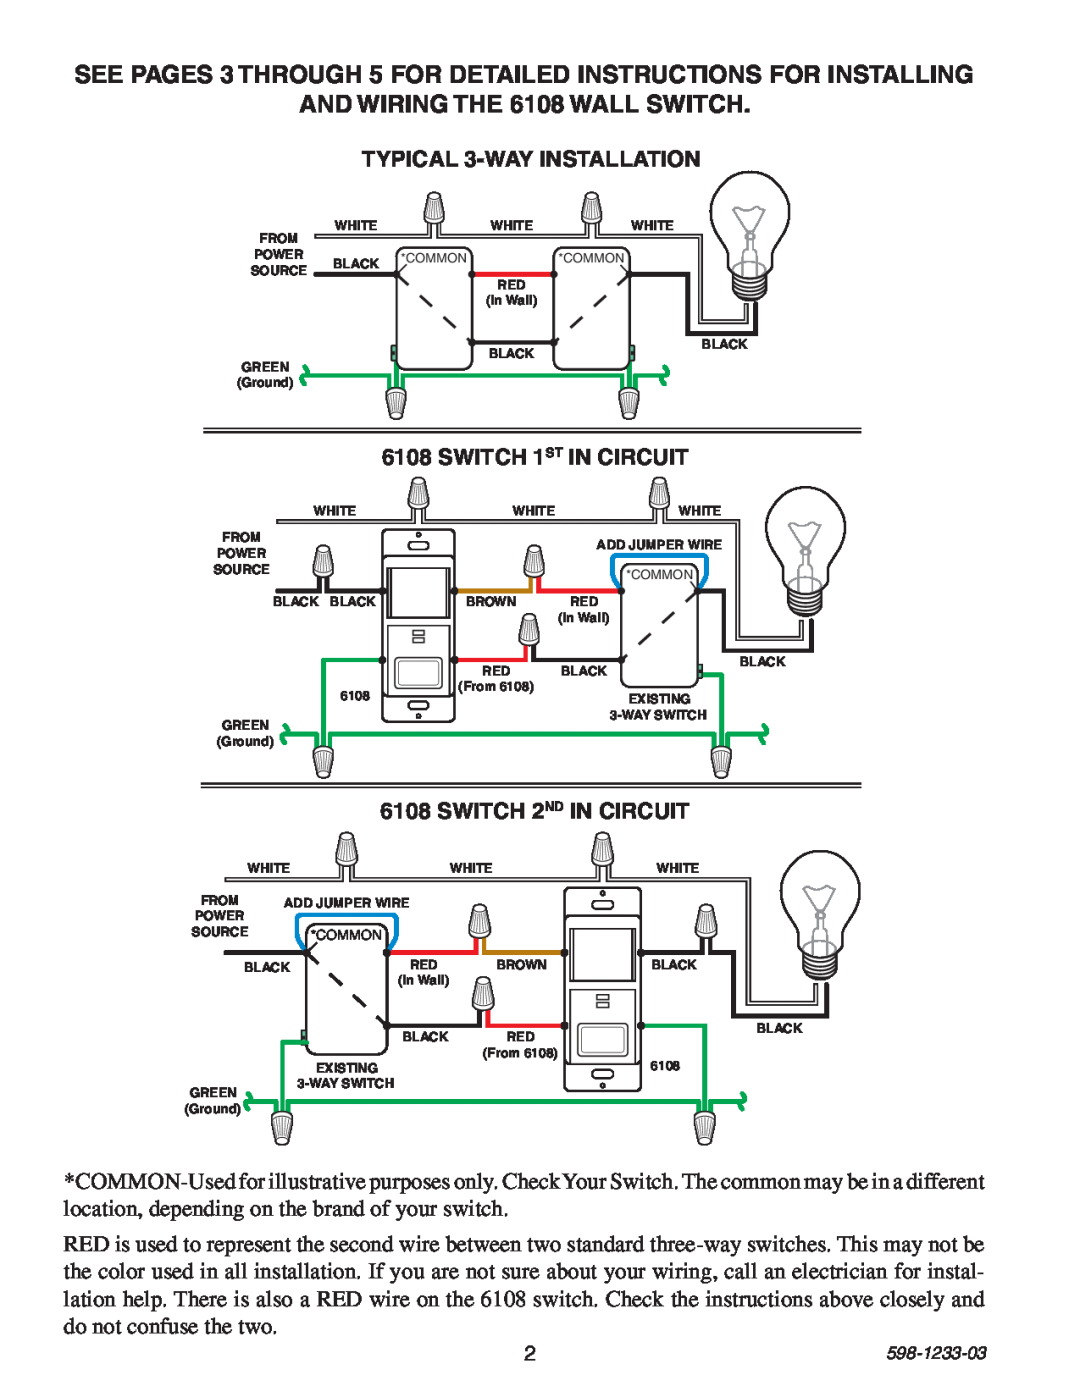 Heath Zenith and wiring the 6108 Wall Switch, TYPICAL 3-WAYINSTALLATION, SWITCH 1ST IN CIRCUIT, SWITCH 2ND IN CIRCUIT 